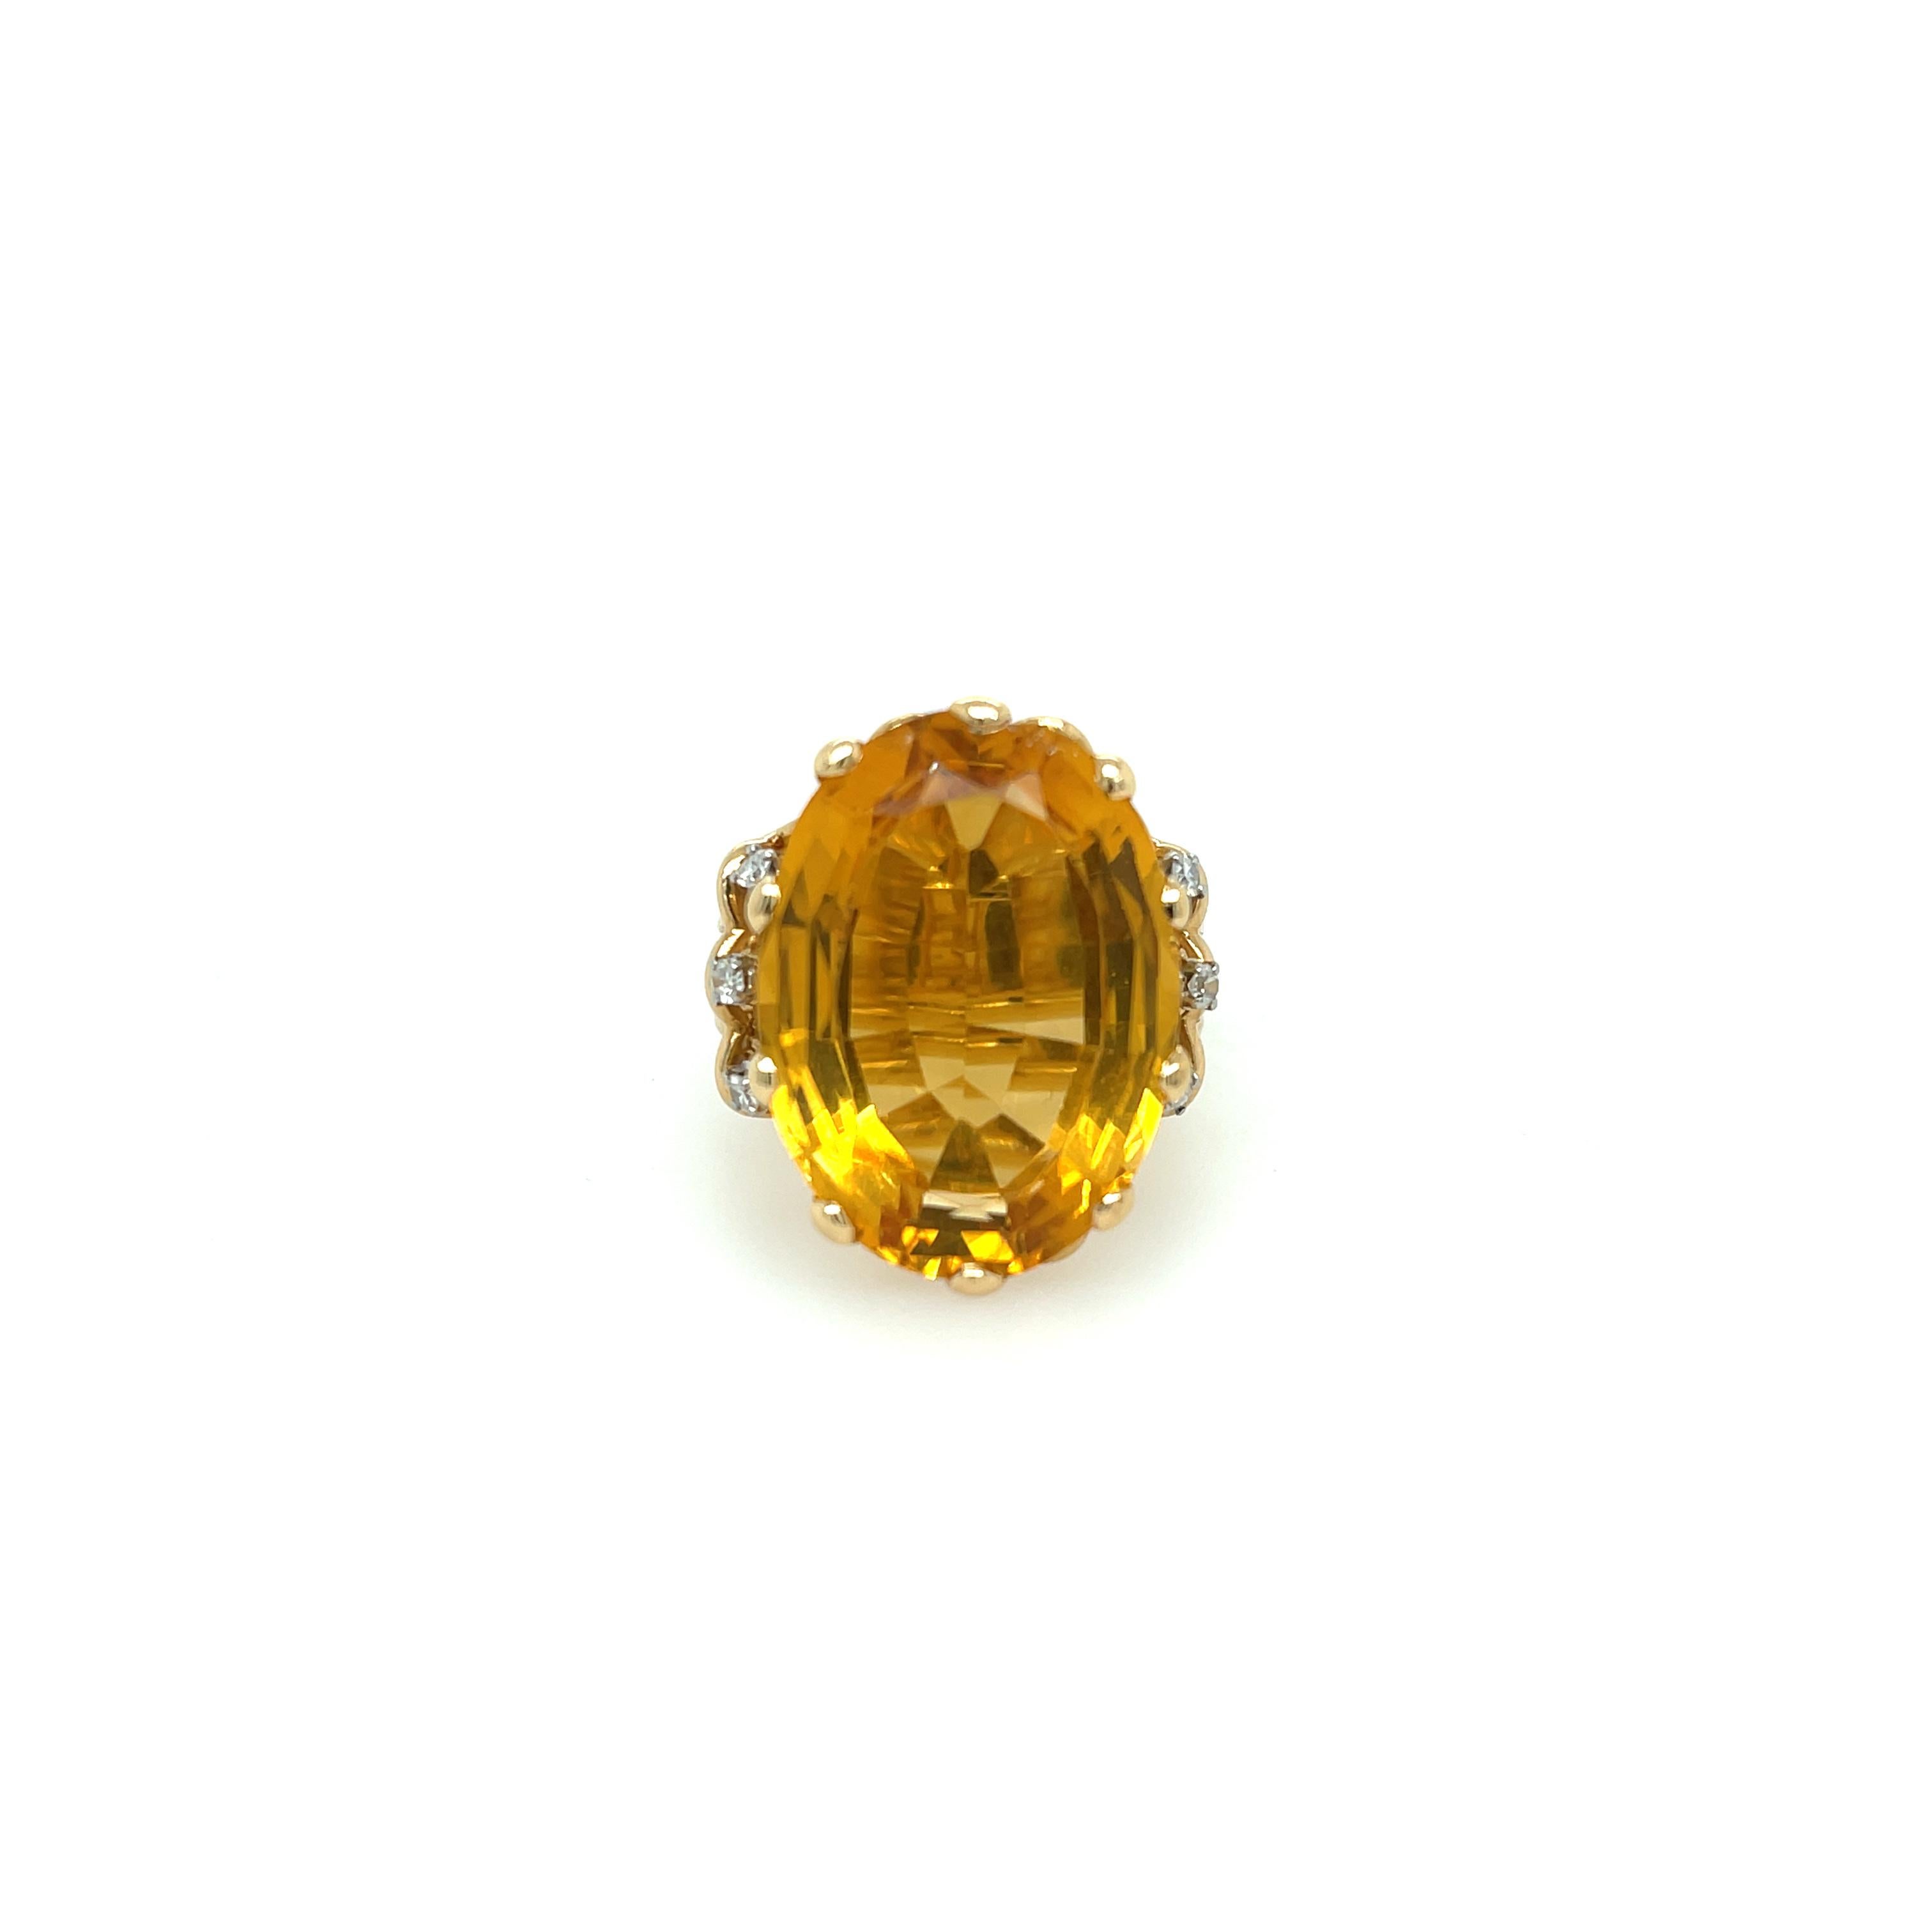 Citrine & Diamond Ring in 14K Yellow Gold. The ring features an oval cut citrine that is approximately 18.5ct accented with 6 round diamonds (0.15ctw apprx). 
Ring size 6.5
14.4 grams
